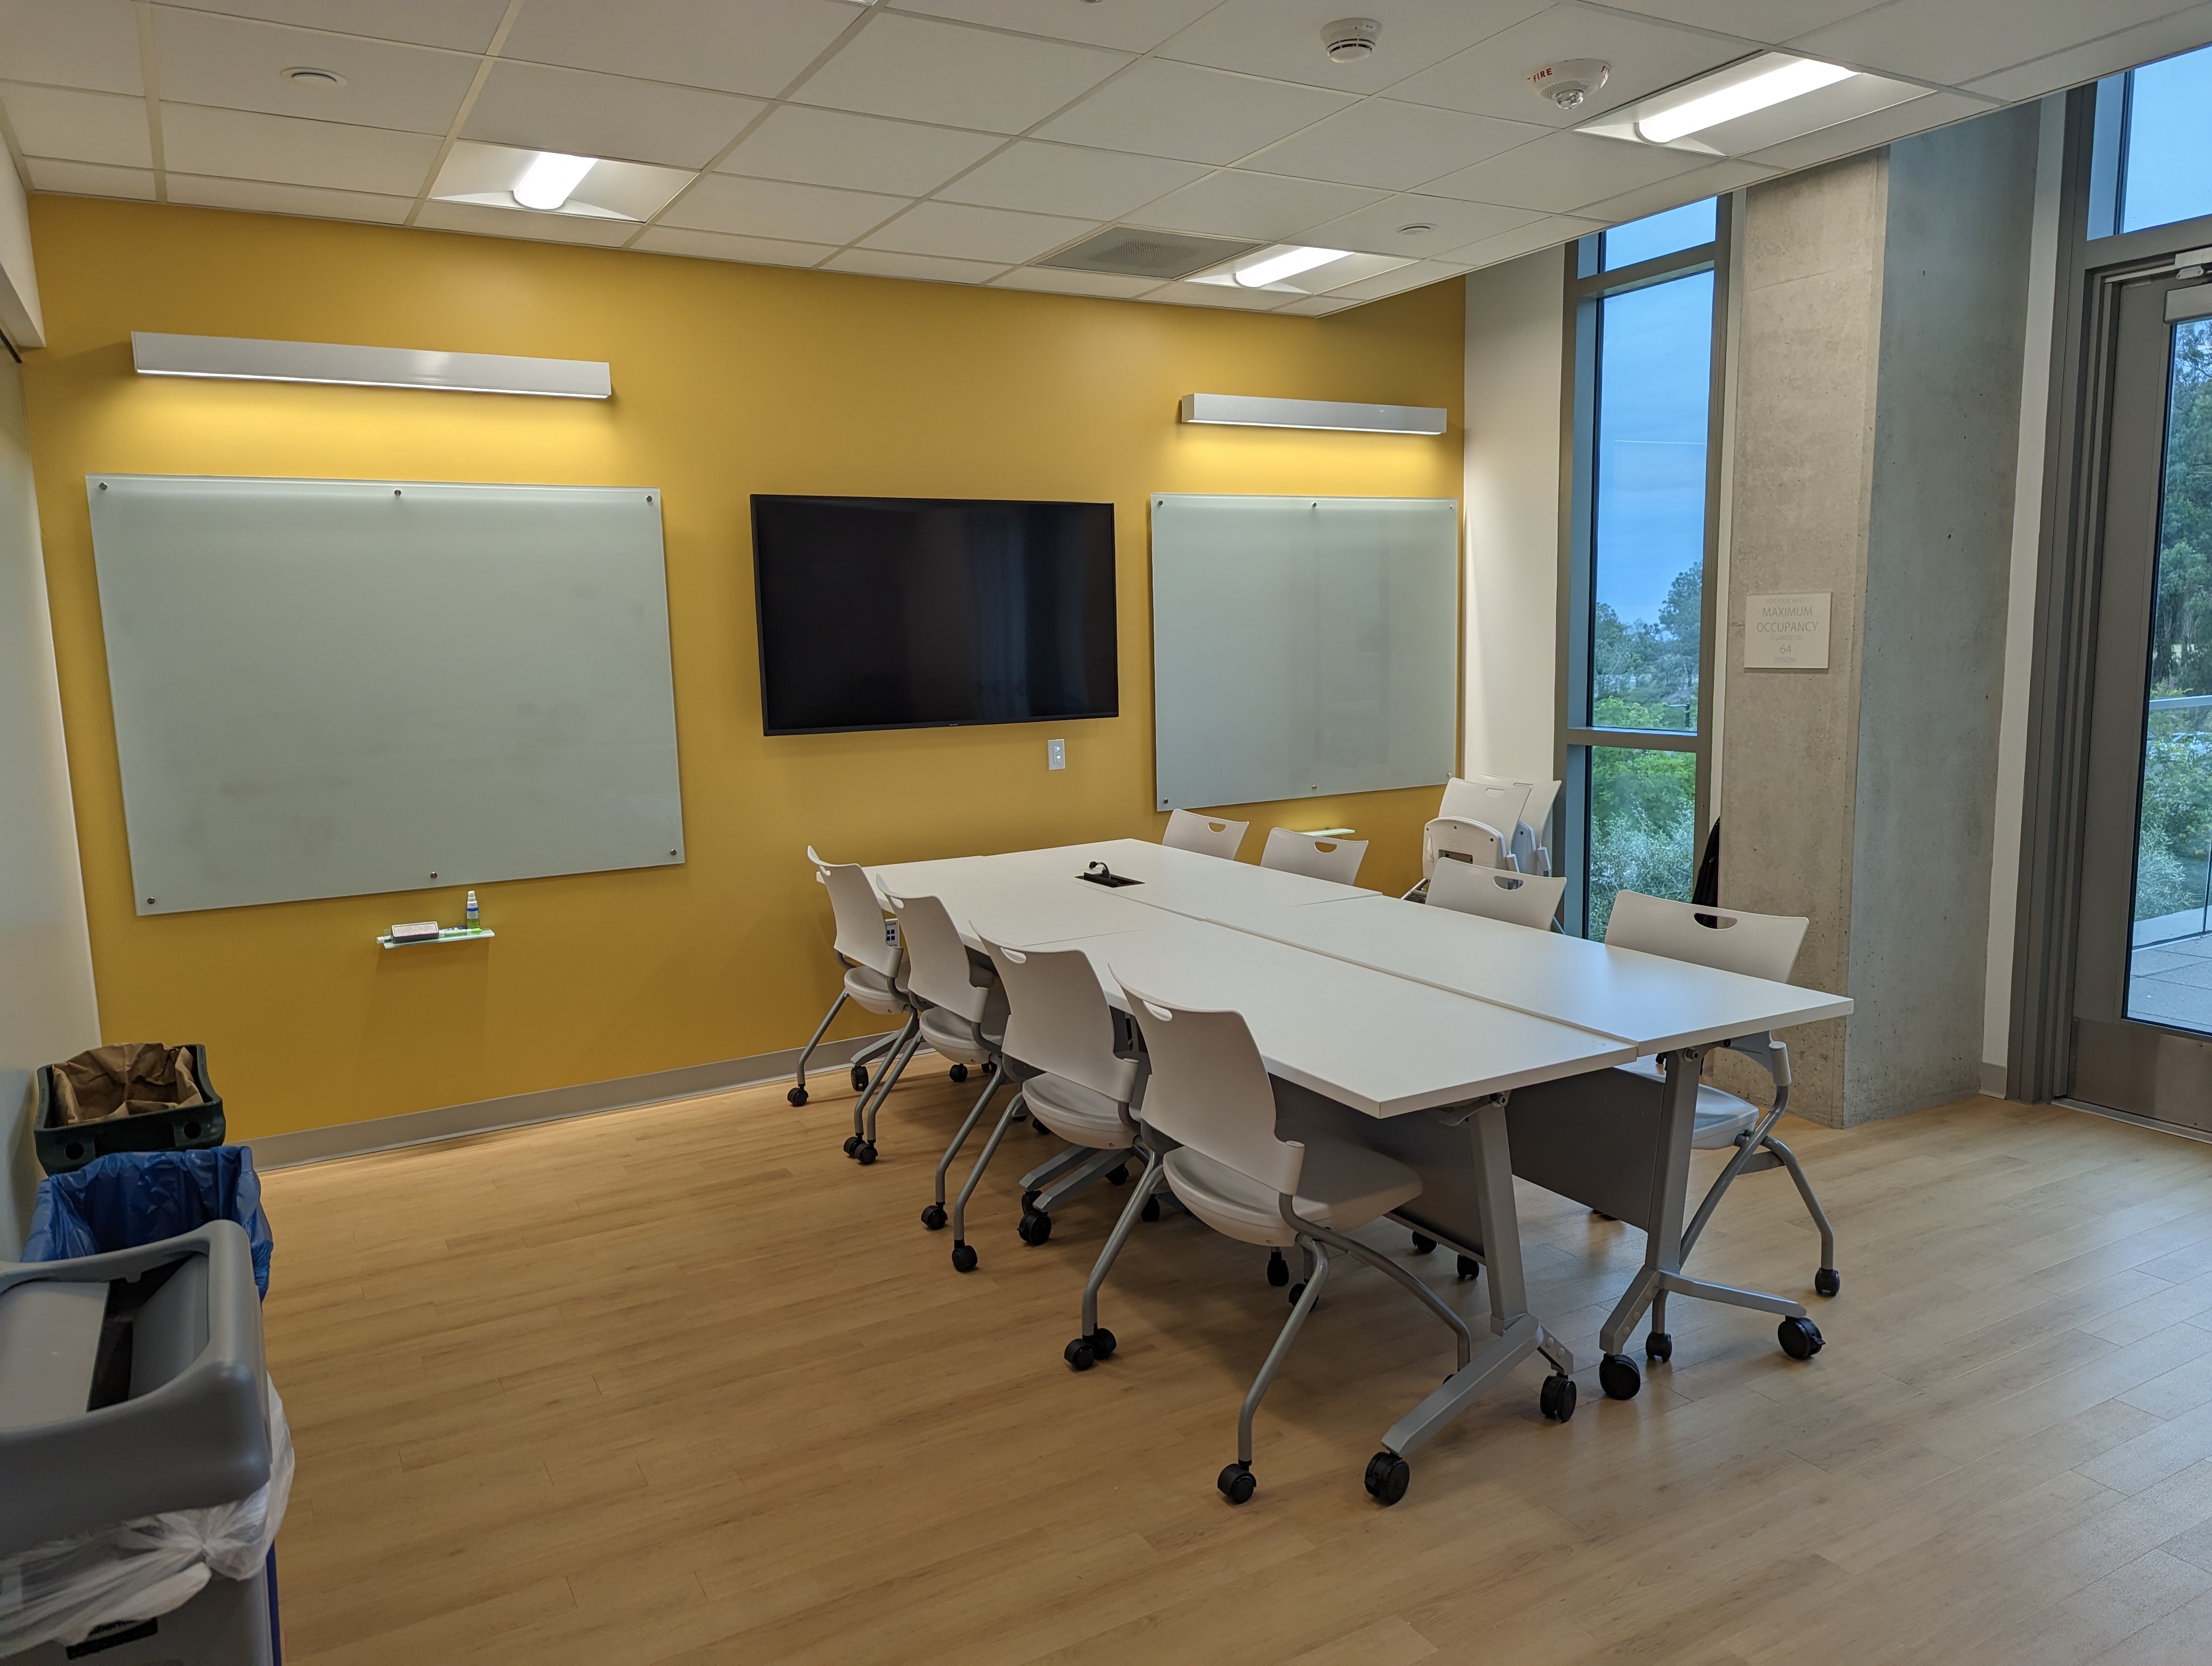 Image of USP Conference Room